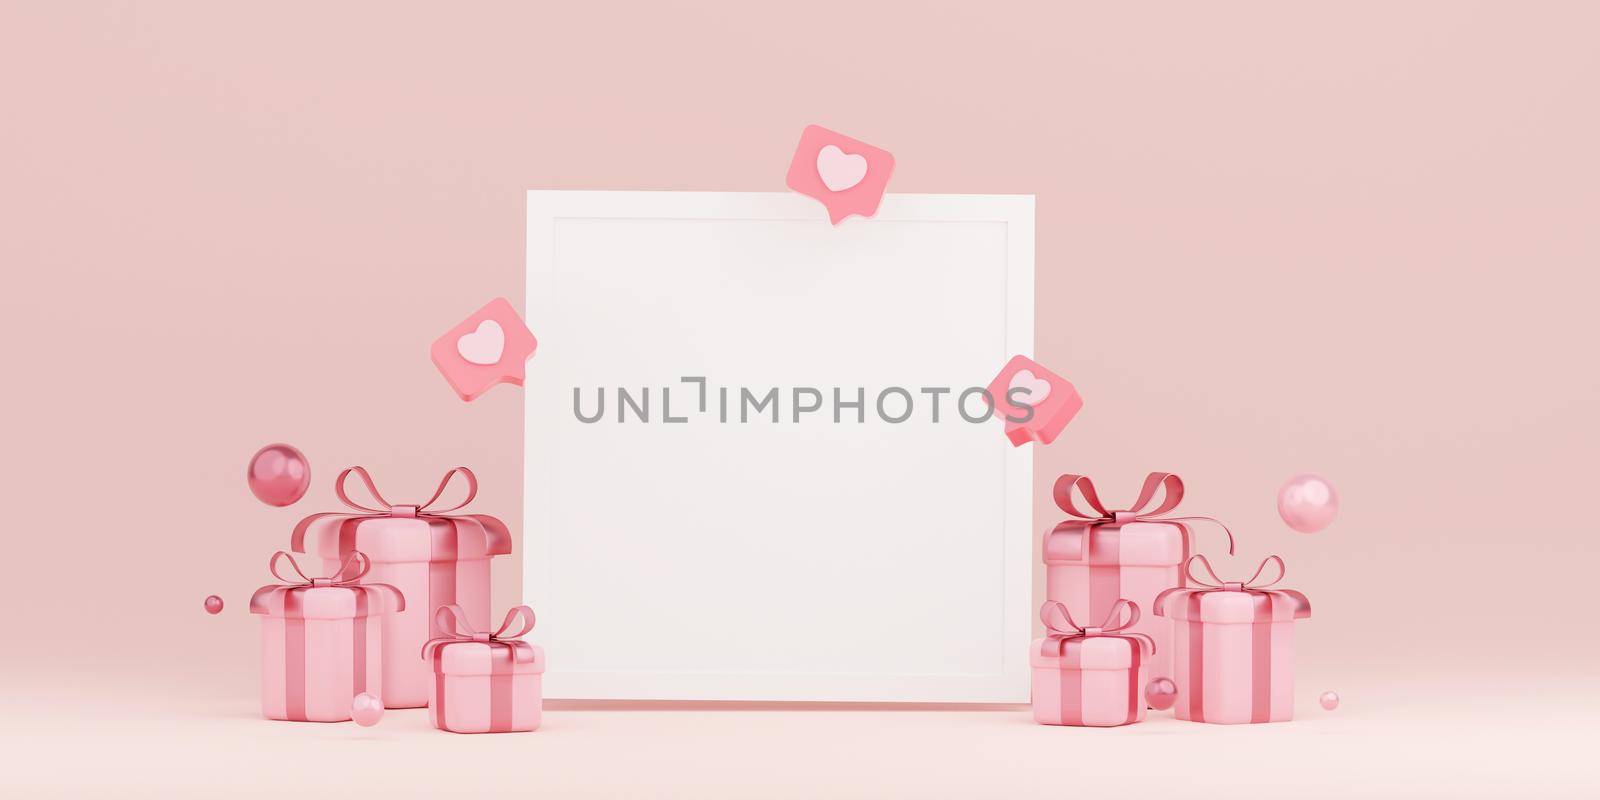 Banner of blank photo frame with pink gift box, 3d illustration by nutzchotwarut